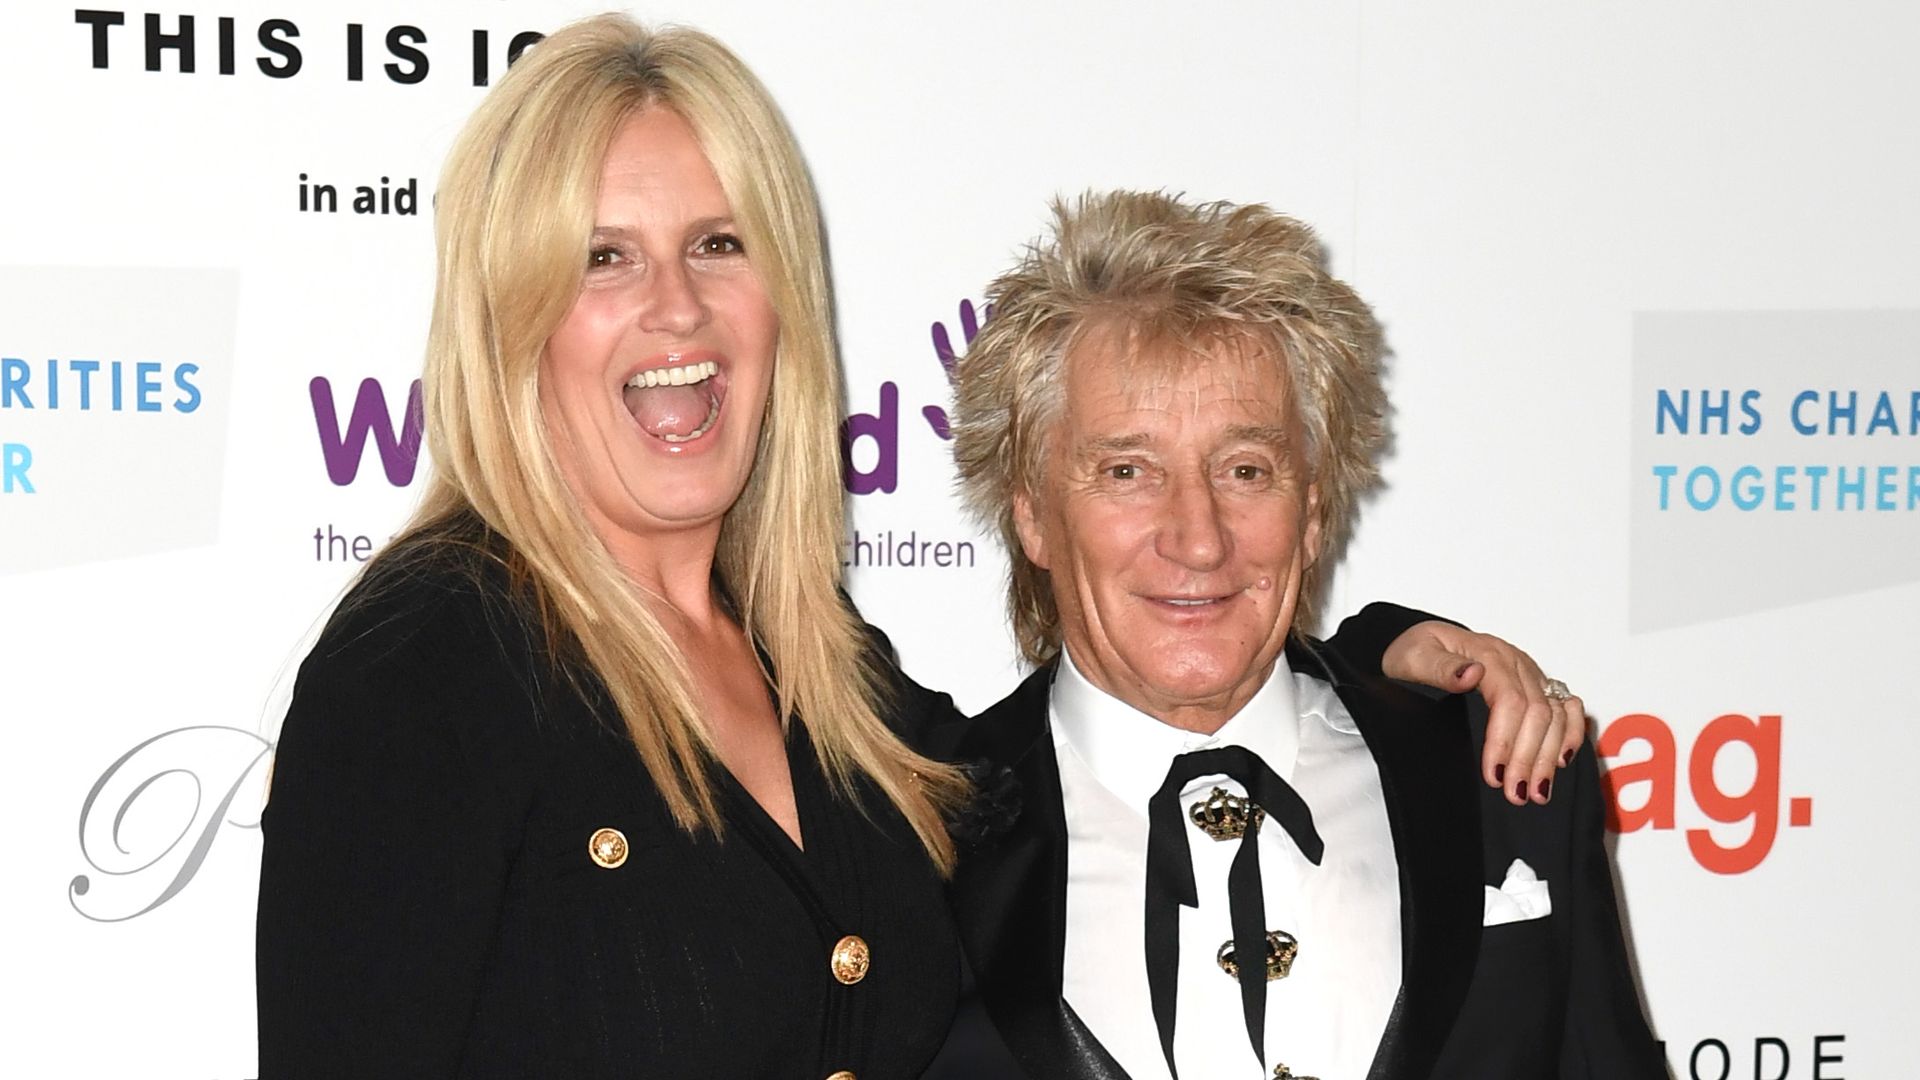 Penny Lancaster with arm around Rod Stewart